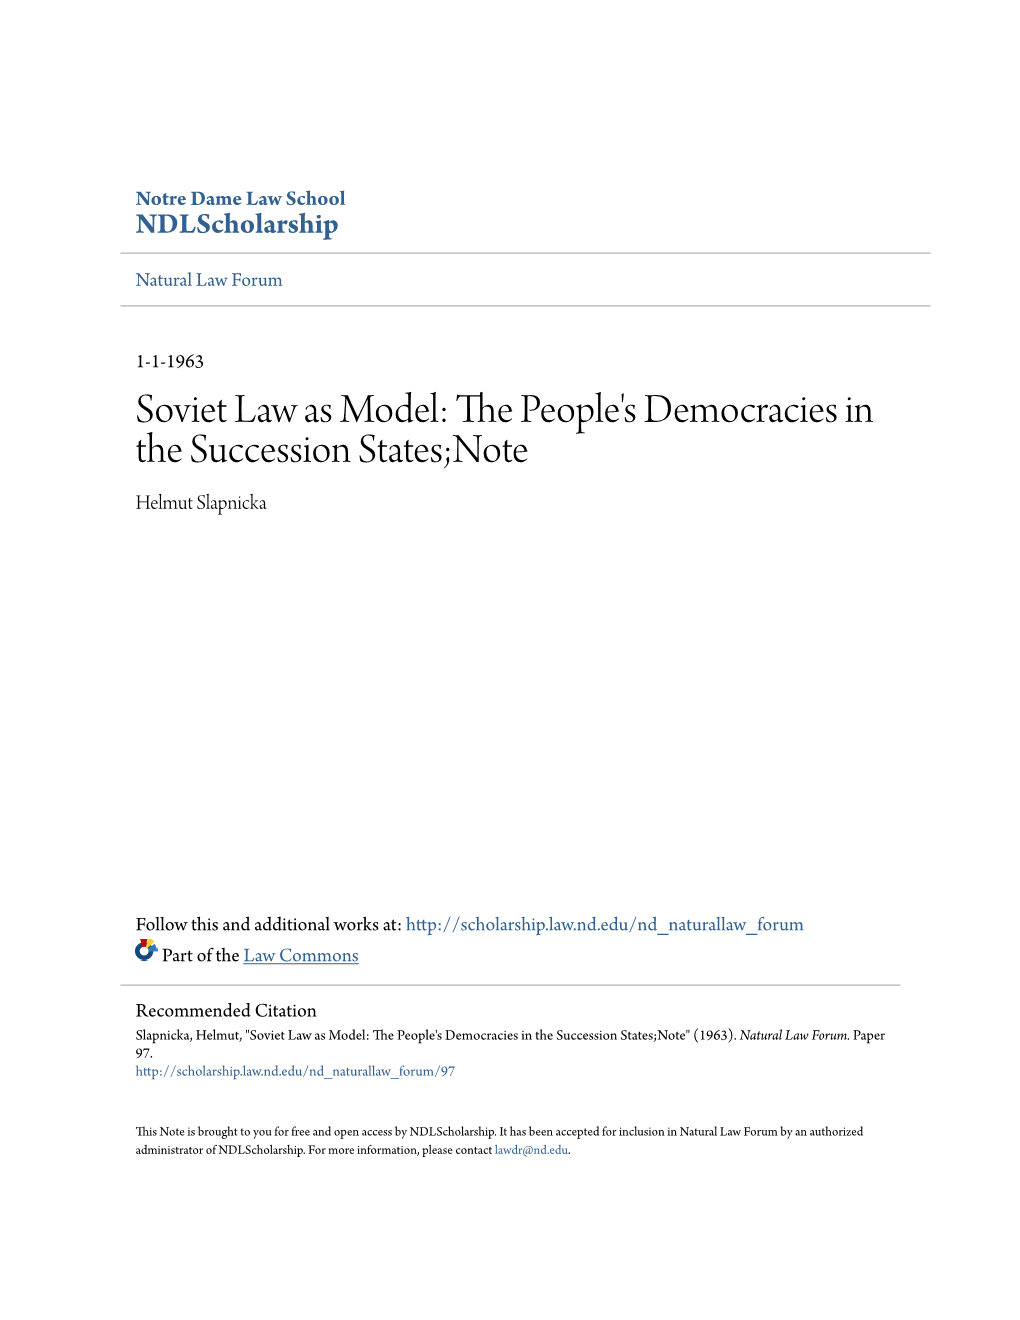 Soviet Law As Model: the Eoplep 'S Democracies in the Succession States;Note Helmut Slapnicka